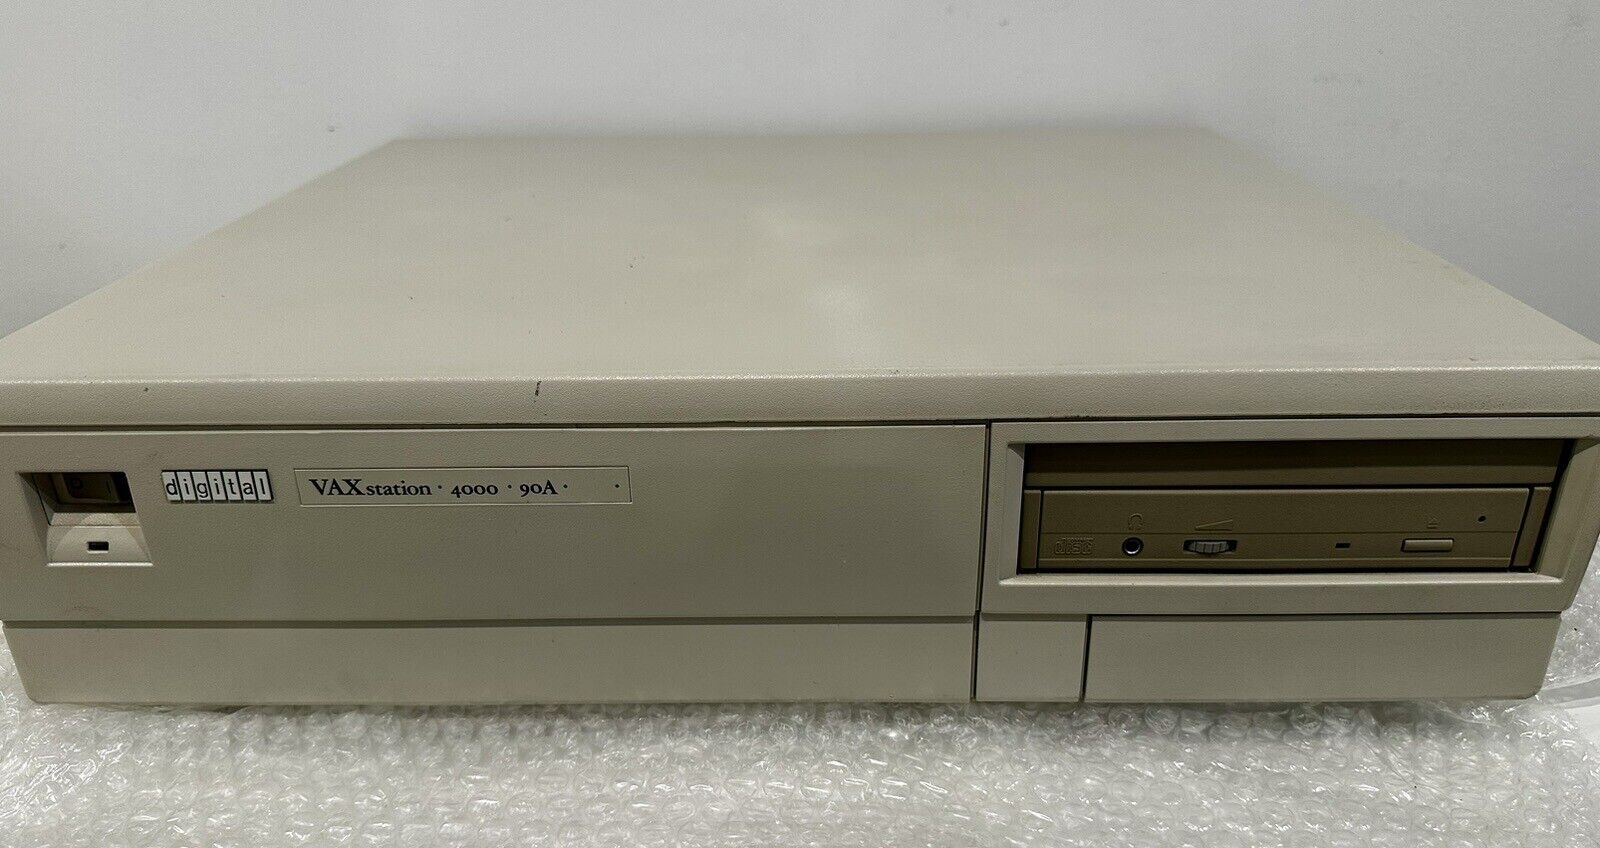 DEC Vaxstation 4000/90A VS49K-AB 54-21177-02 Complete With 128MB and Graphics